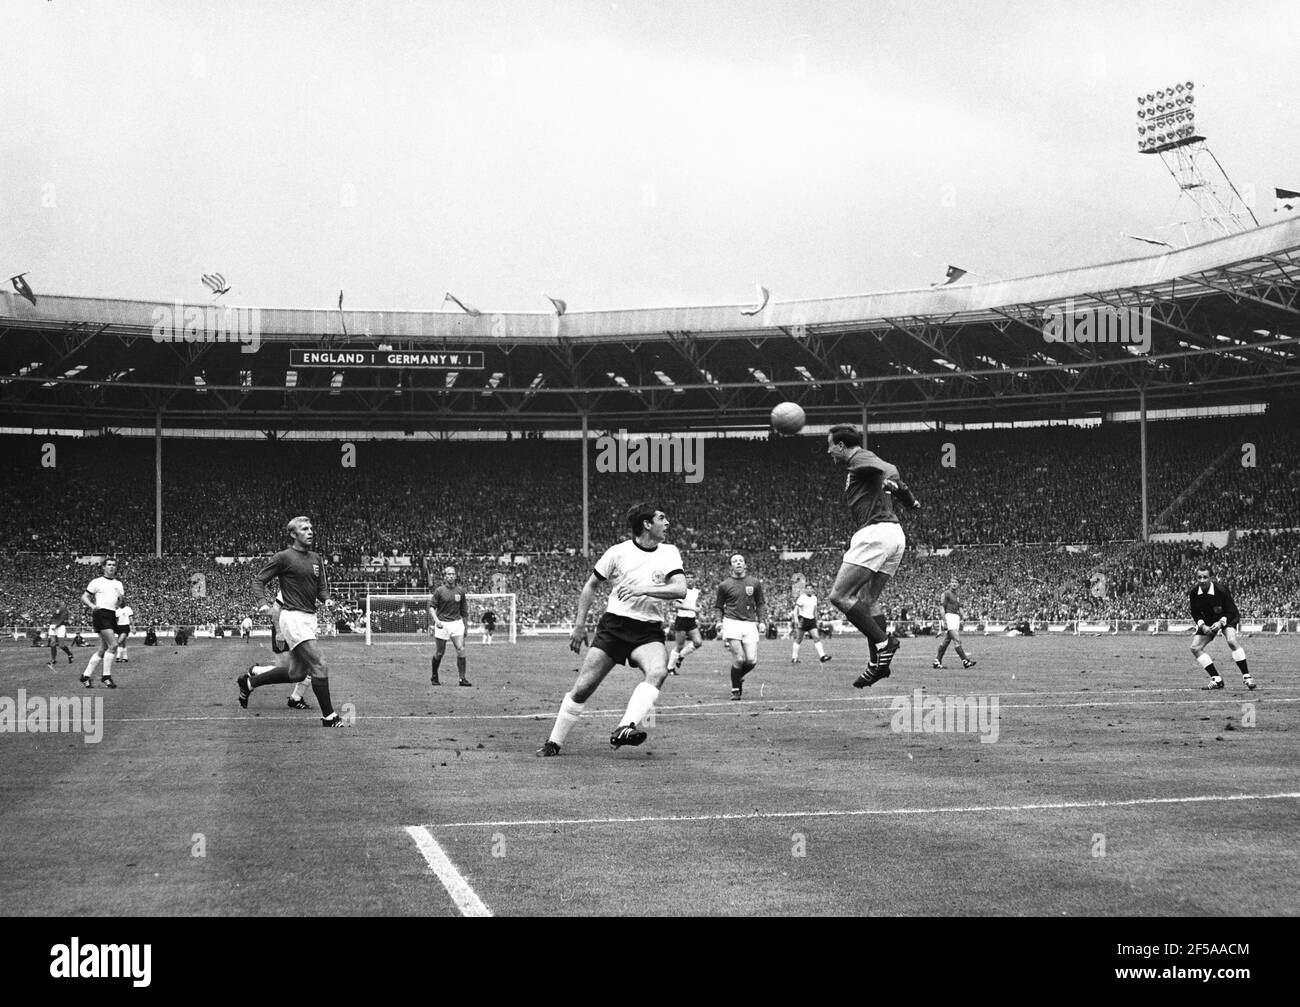 England versus West Germany 1966 World Cup Final, Wembley Stadium 20th minute of the first half.  Ray Wilson of England heads the ball to Captain Bobby Moore past Lothar Emmerich of West Germany  Photo by Tony Henshaw Archive Stock Photo